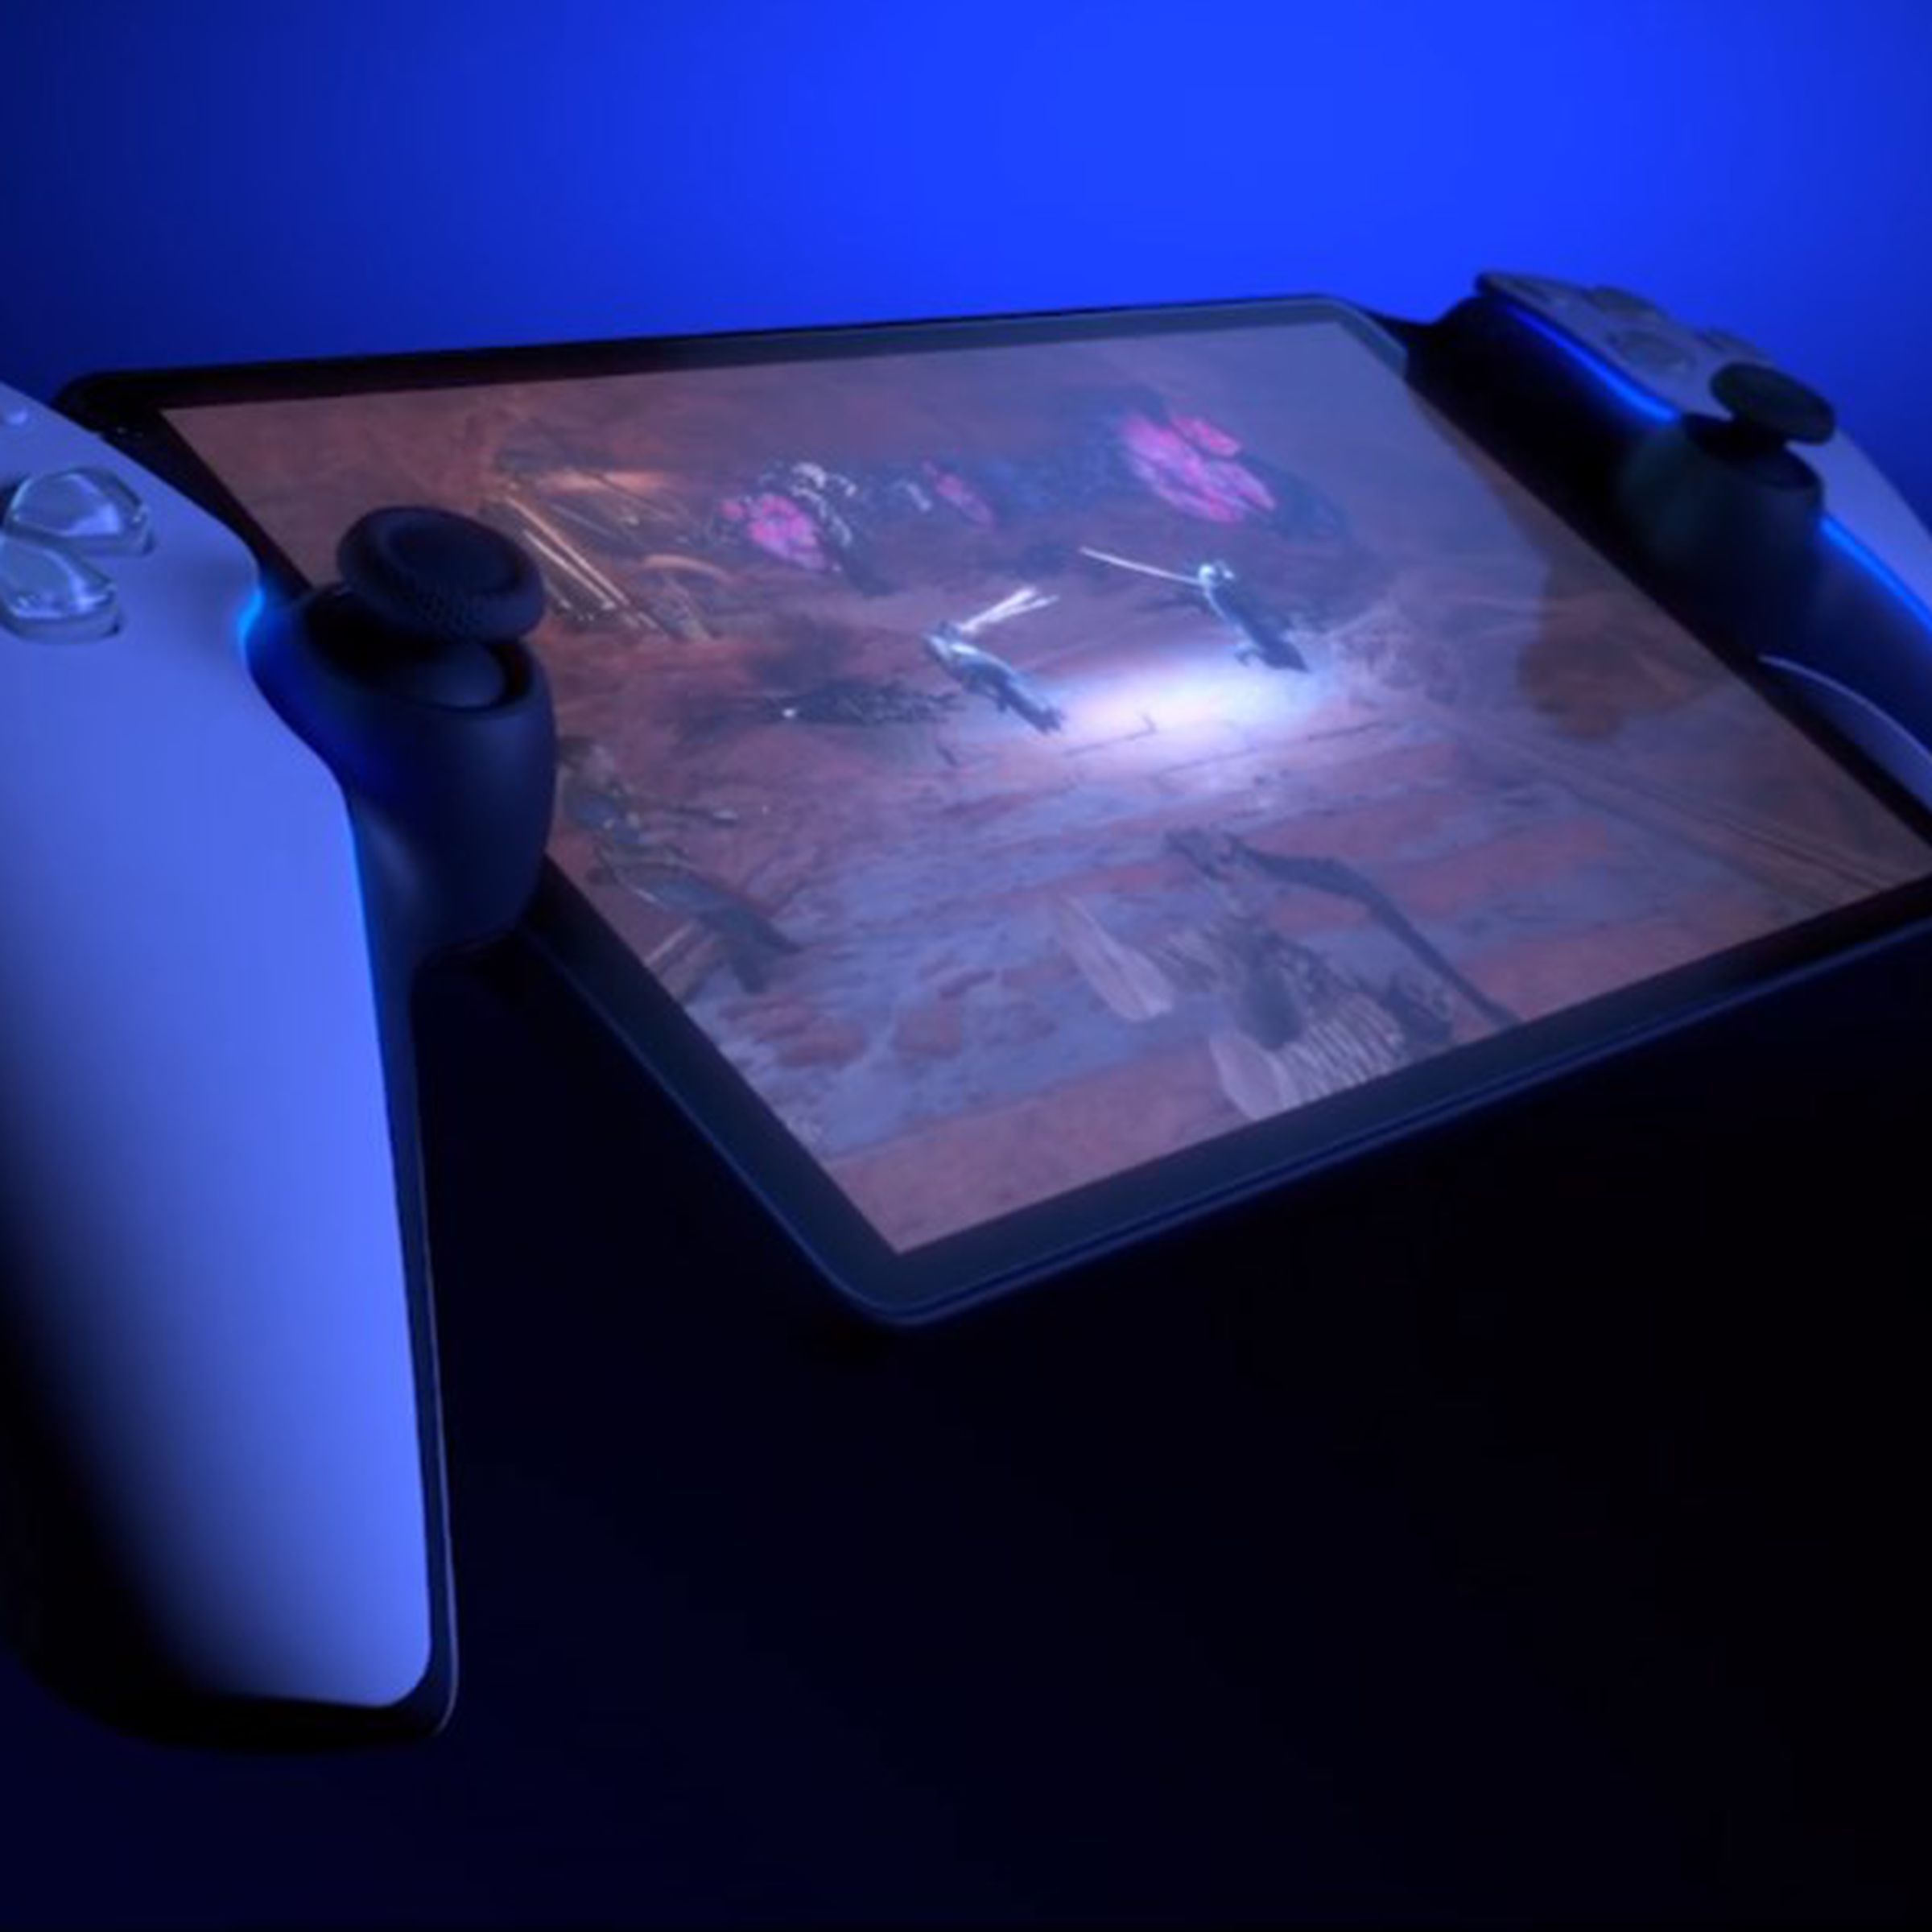 It looks like a DualSense PS5 controller with a big screen in the middle.